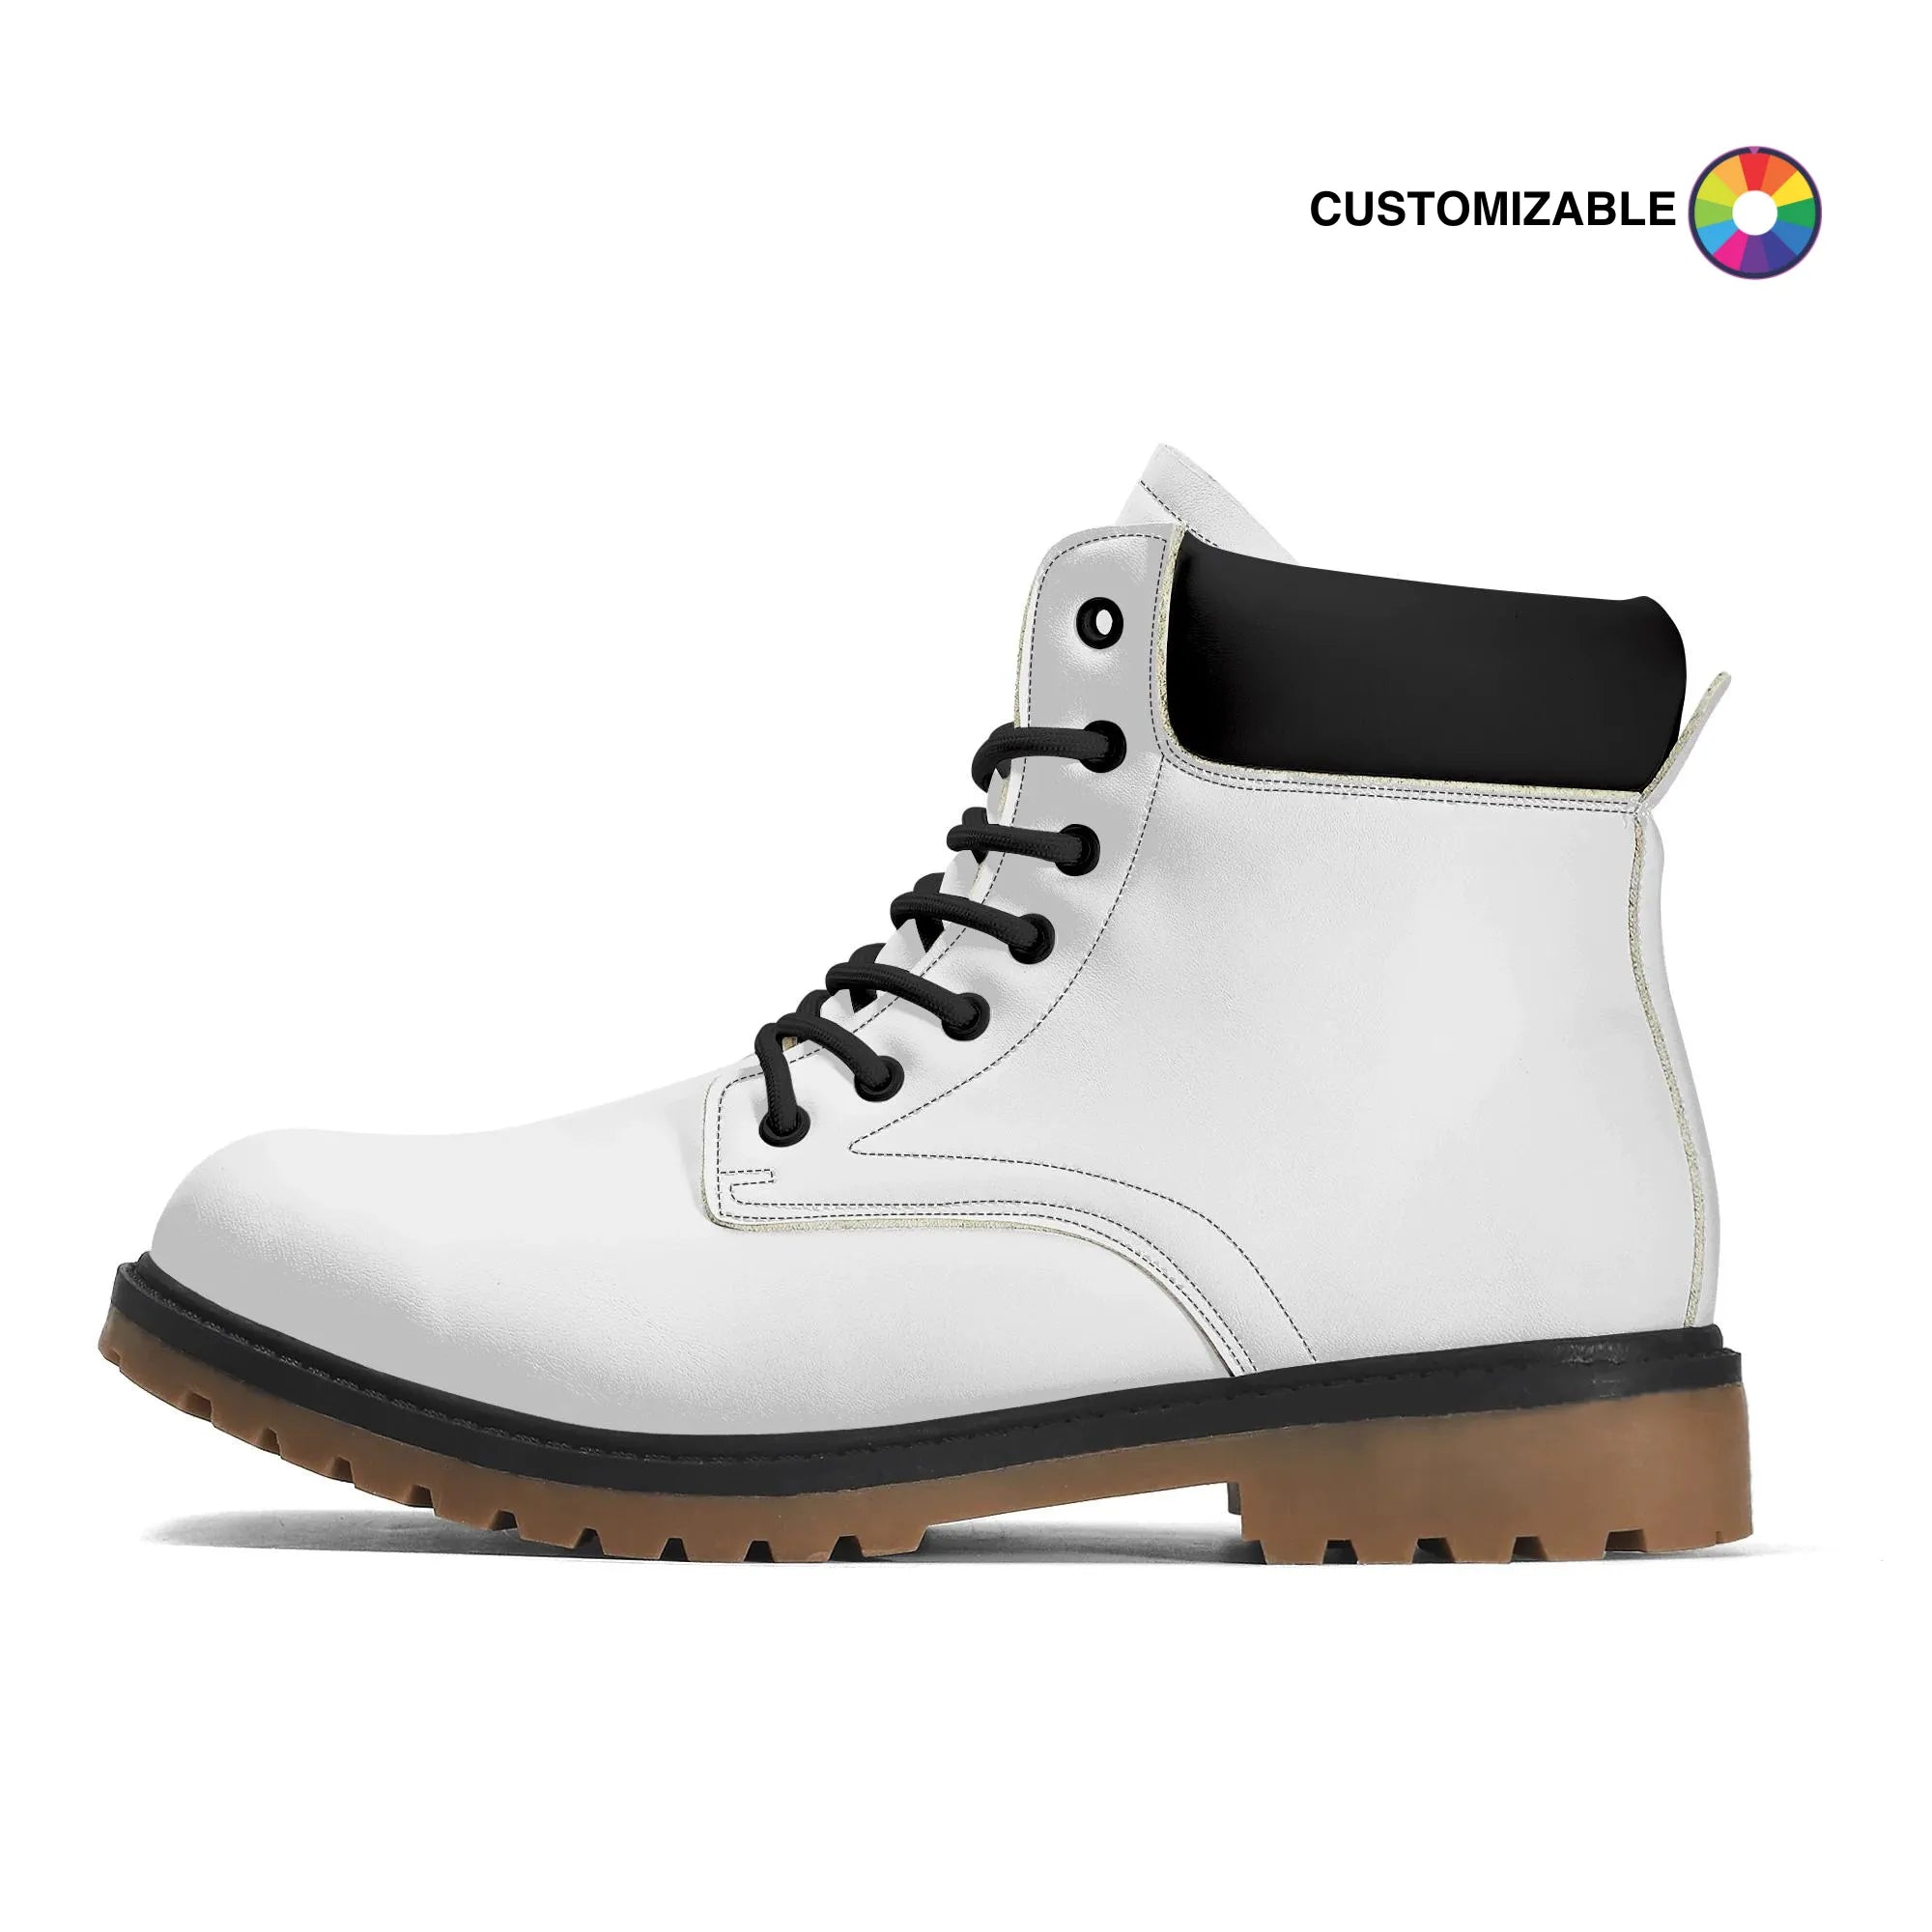 Customizable Vegan Leather Boots (Brown Outsole)